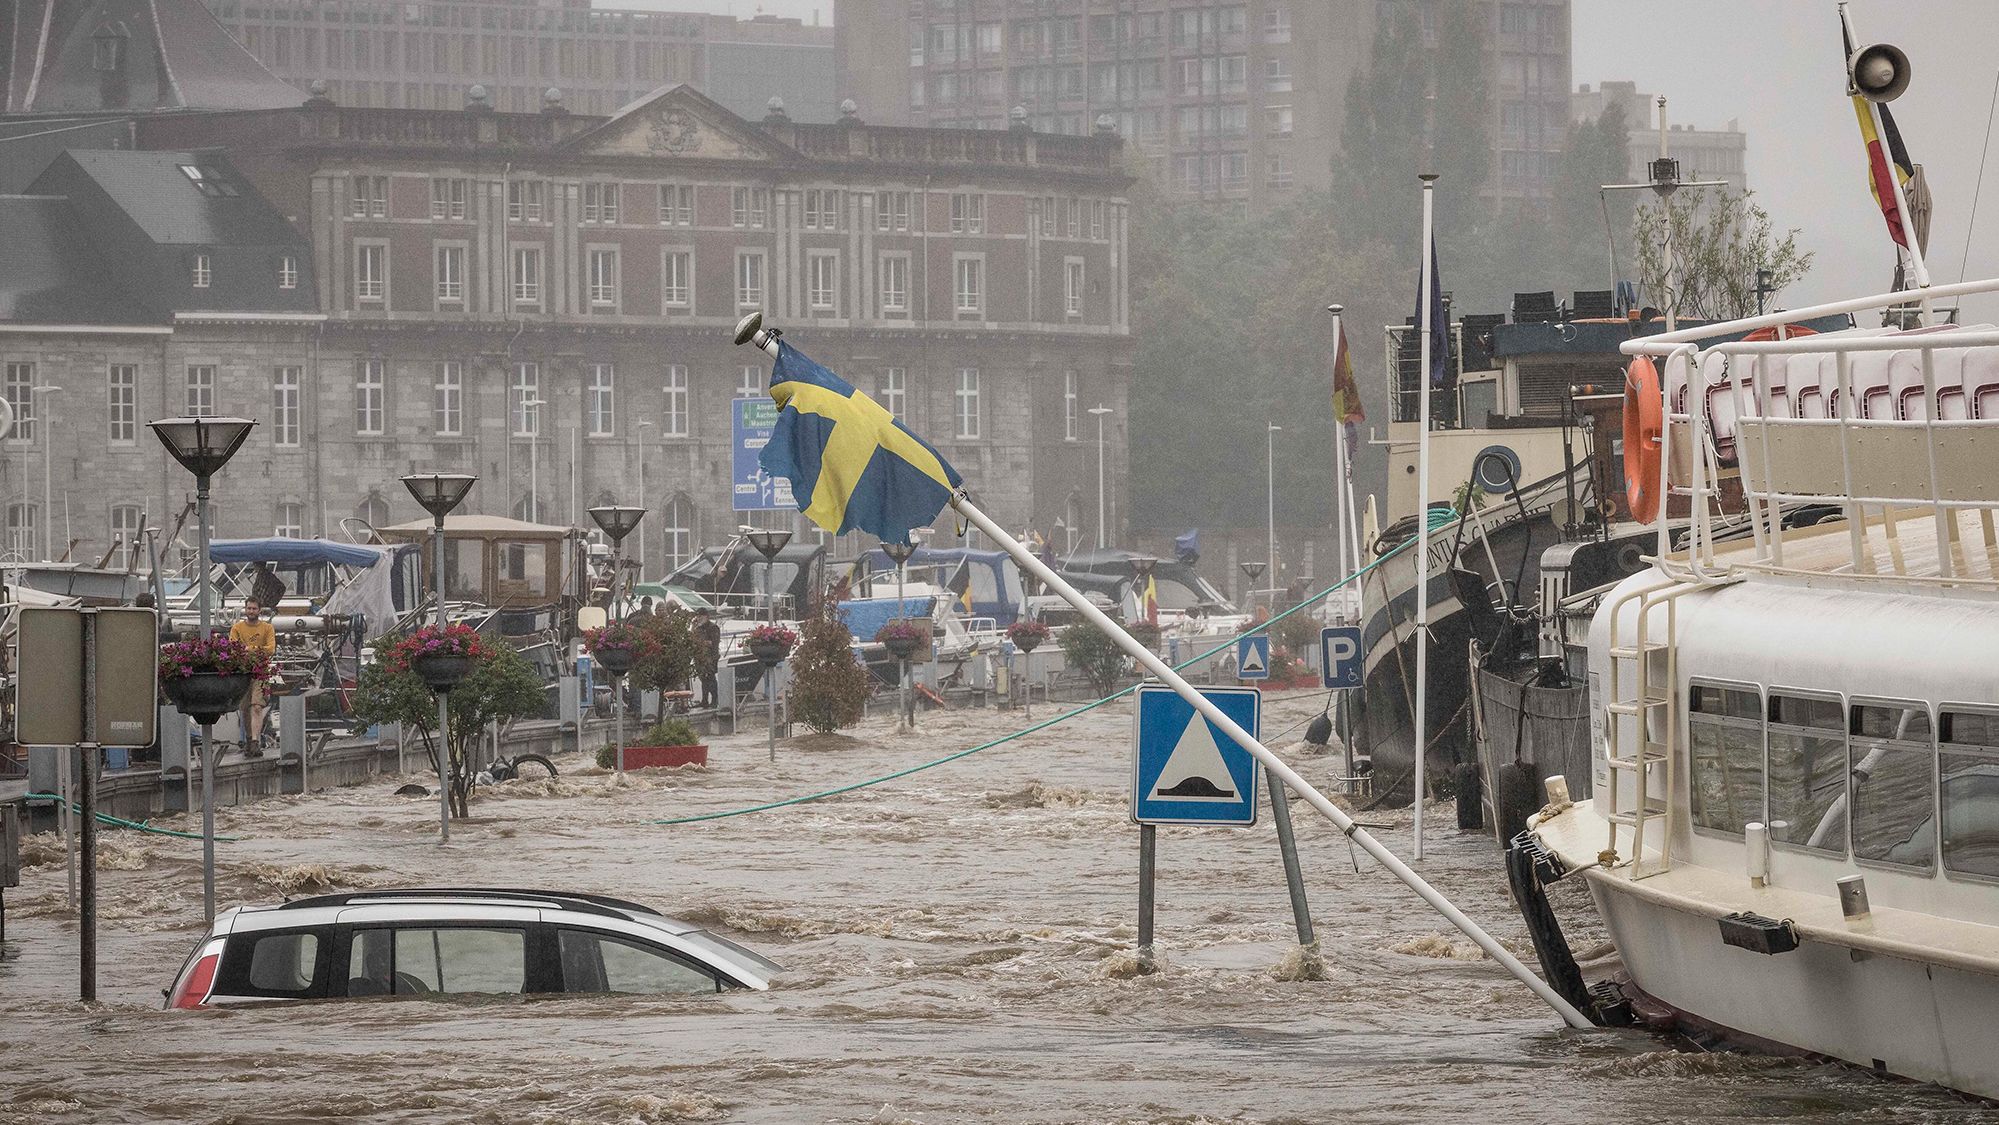 A car floats in the Meuse River during heavy flooding in Liege, Belgium, on Thursday.